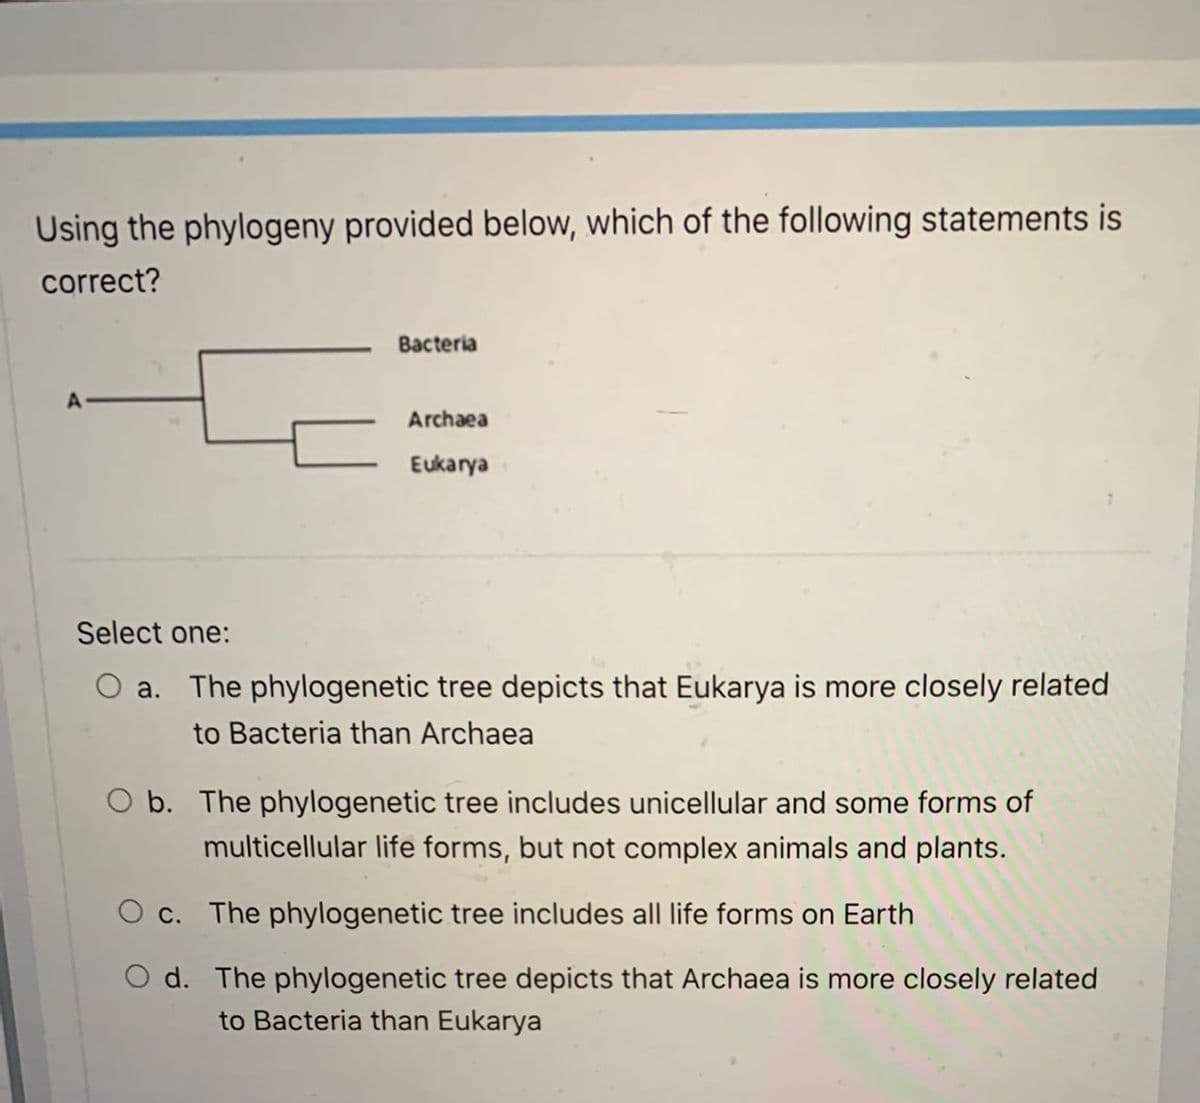 Using the phylogeny provided below, which of the following statements is
correct?
Bacteria
Archaea
Eukarya
Select one:
O a. The phylogenetic tree depicts that Eukarya is more closely related
to Bacteria than Archaea
O b. The phylogenetic tree includes unicellular and some forms of
multicellular life forms, but not complex animals and plants.
O c. The phylogenetic tree includes all life forms on Earth
O d. The phylogenetic tree depicts that Archaea is more closely related
to Bacteria than Eukarya
